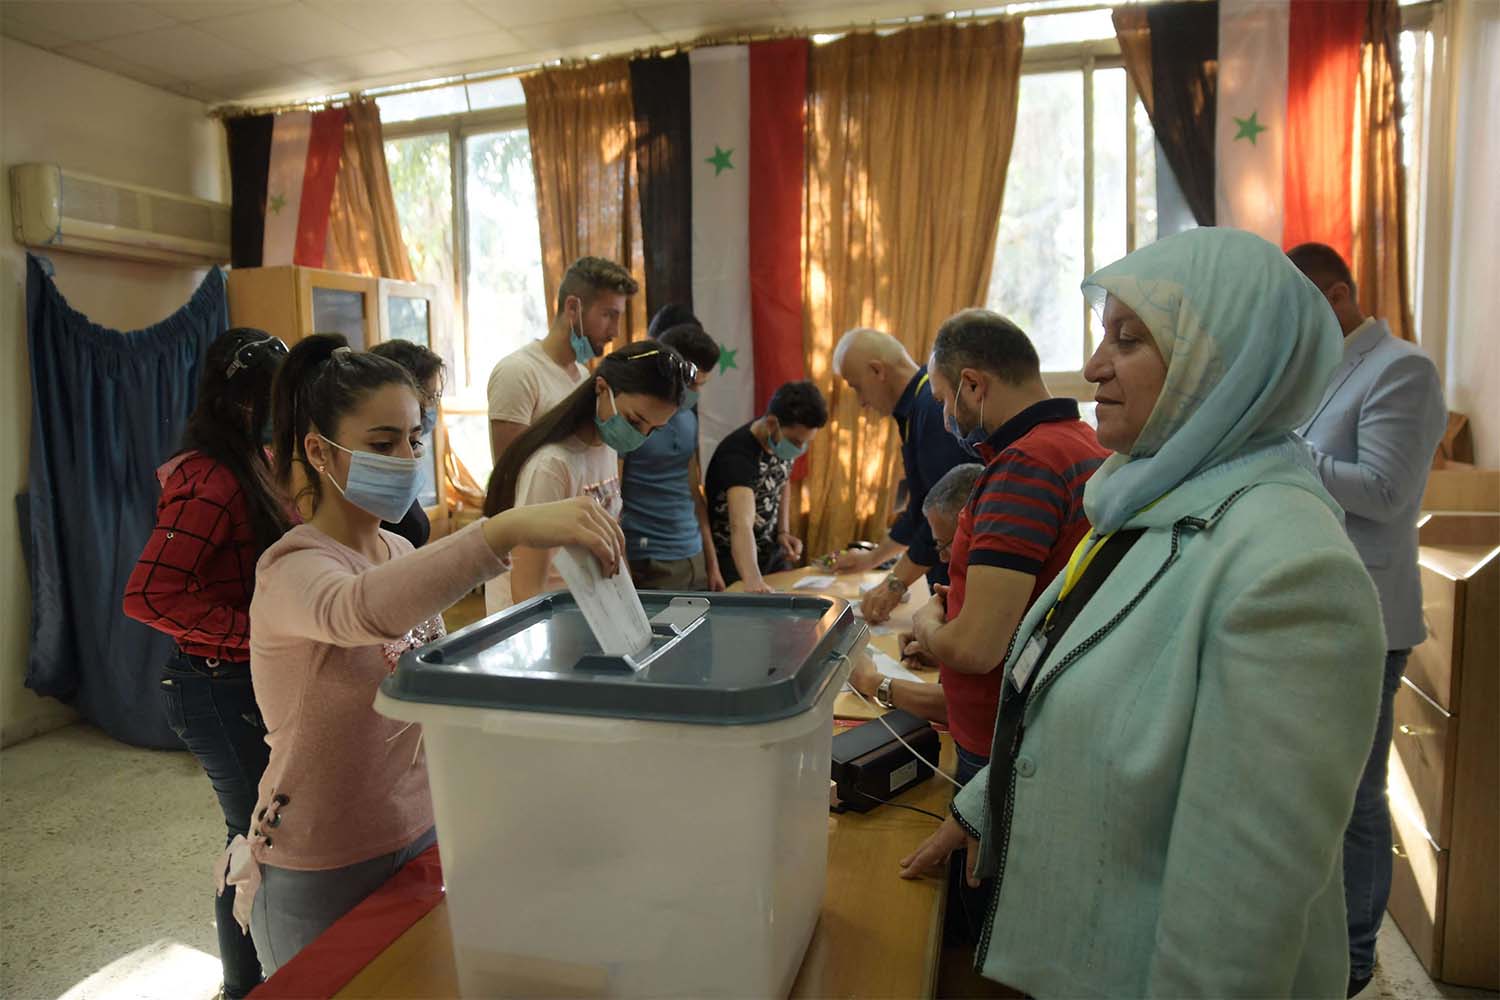 Syrians residing in Lebanon cast their vote during voting for the upcoming presidential election 